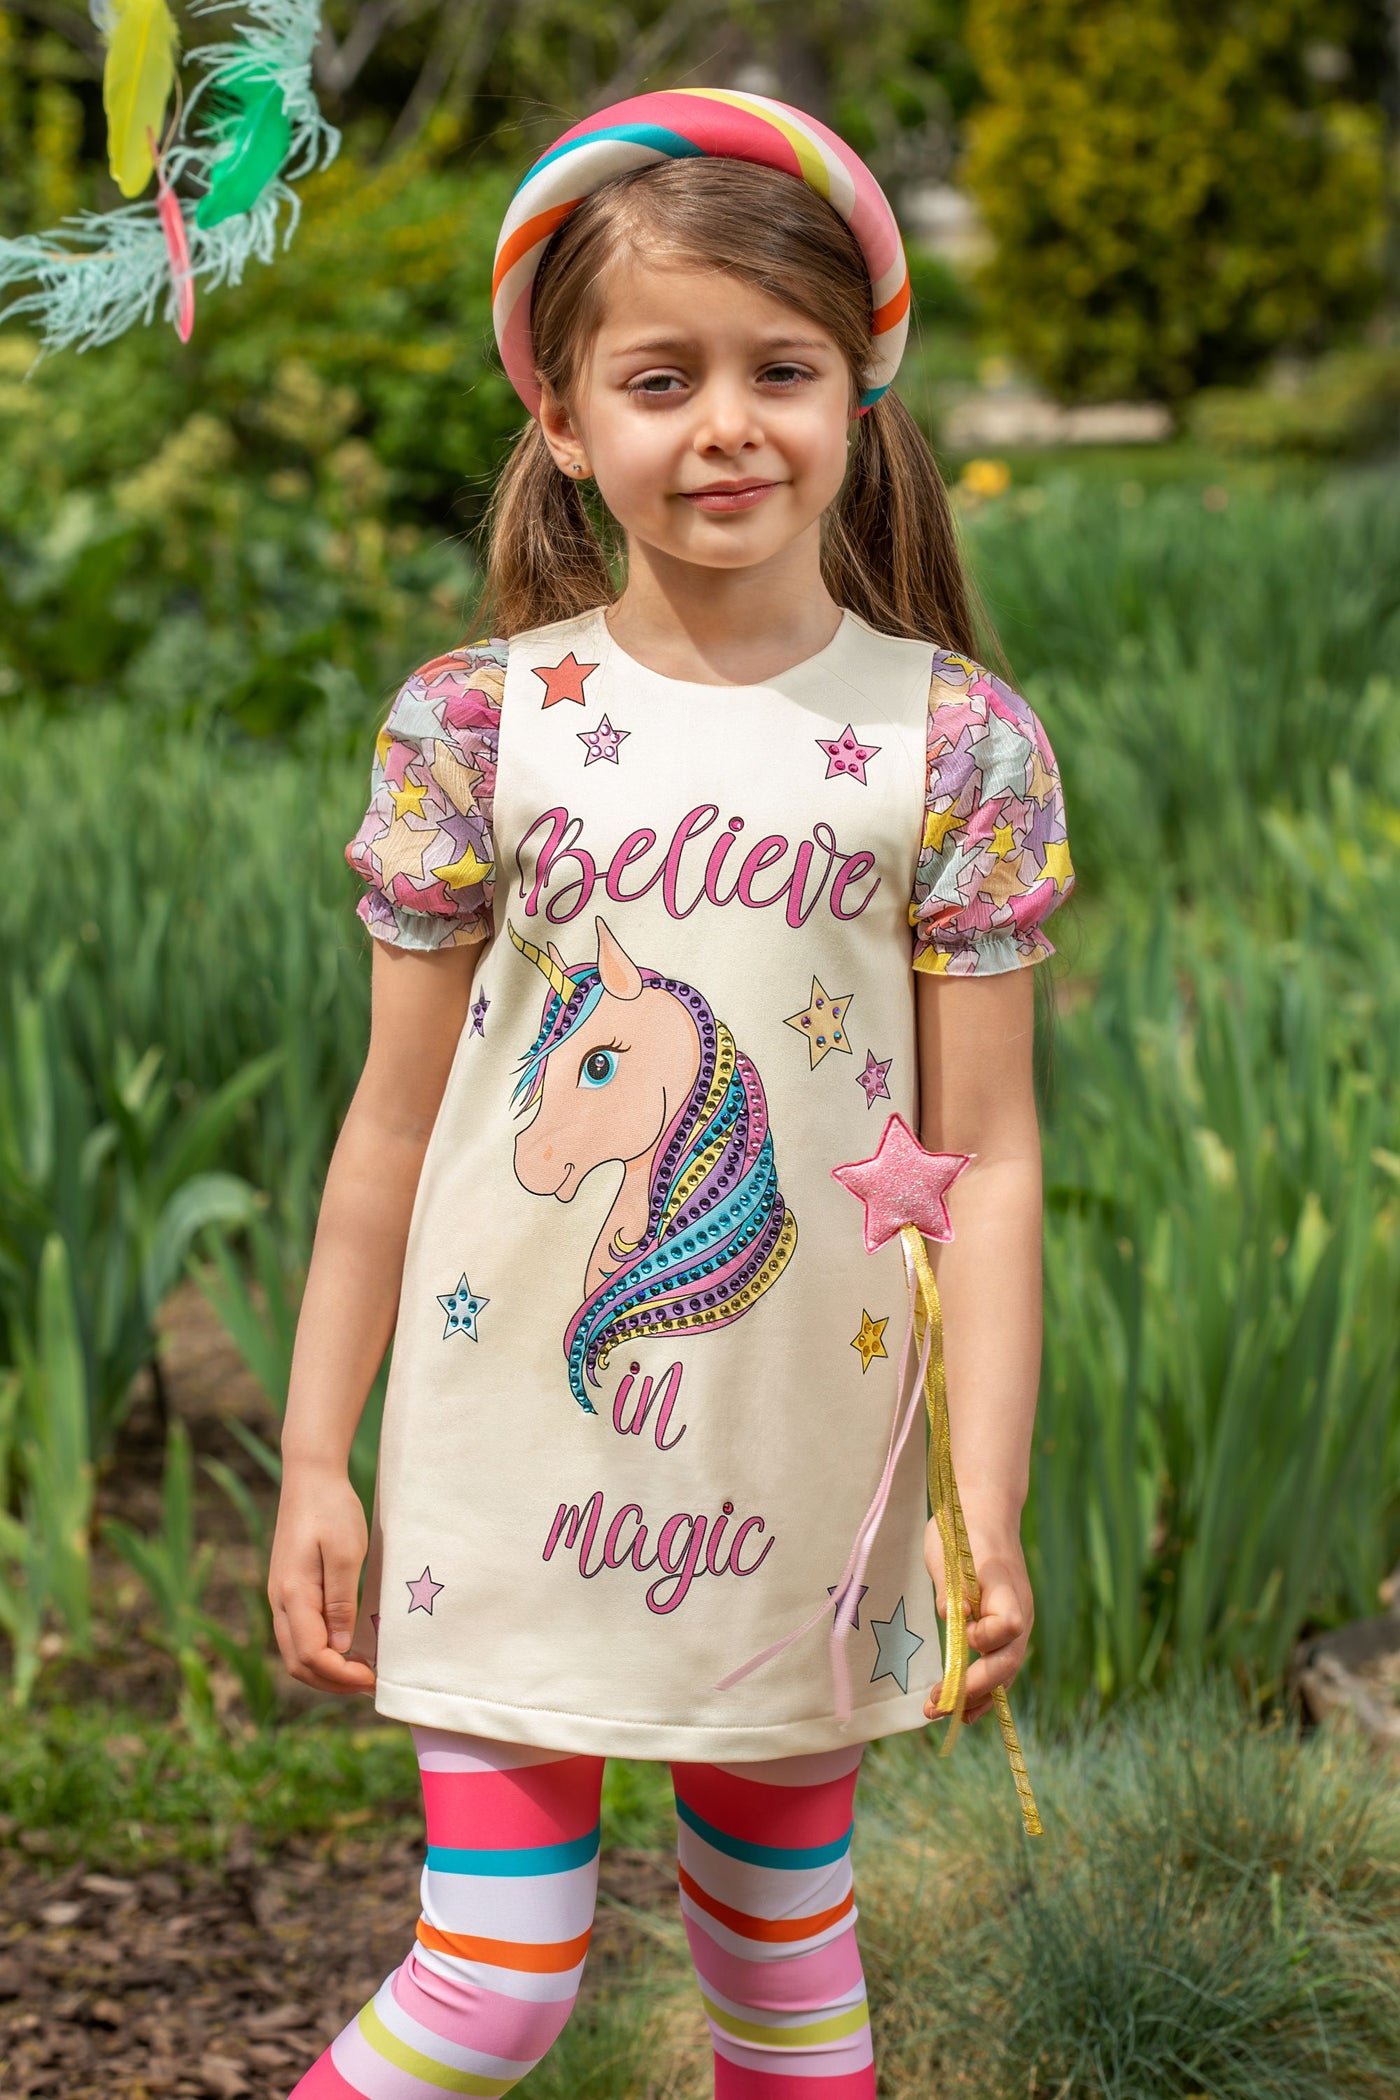 Yellow jersey tunic dress with unicorn with crystals